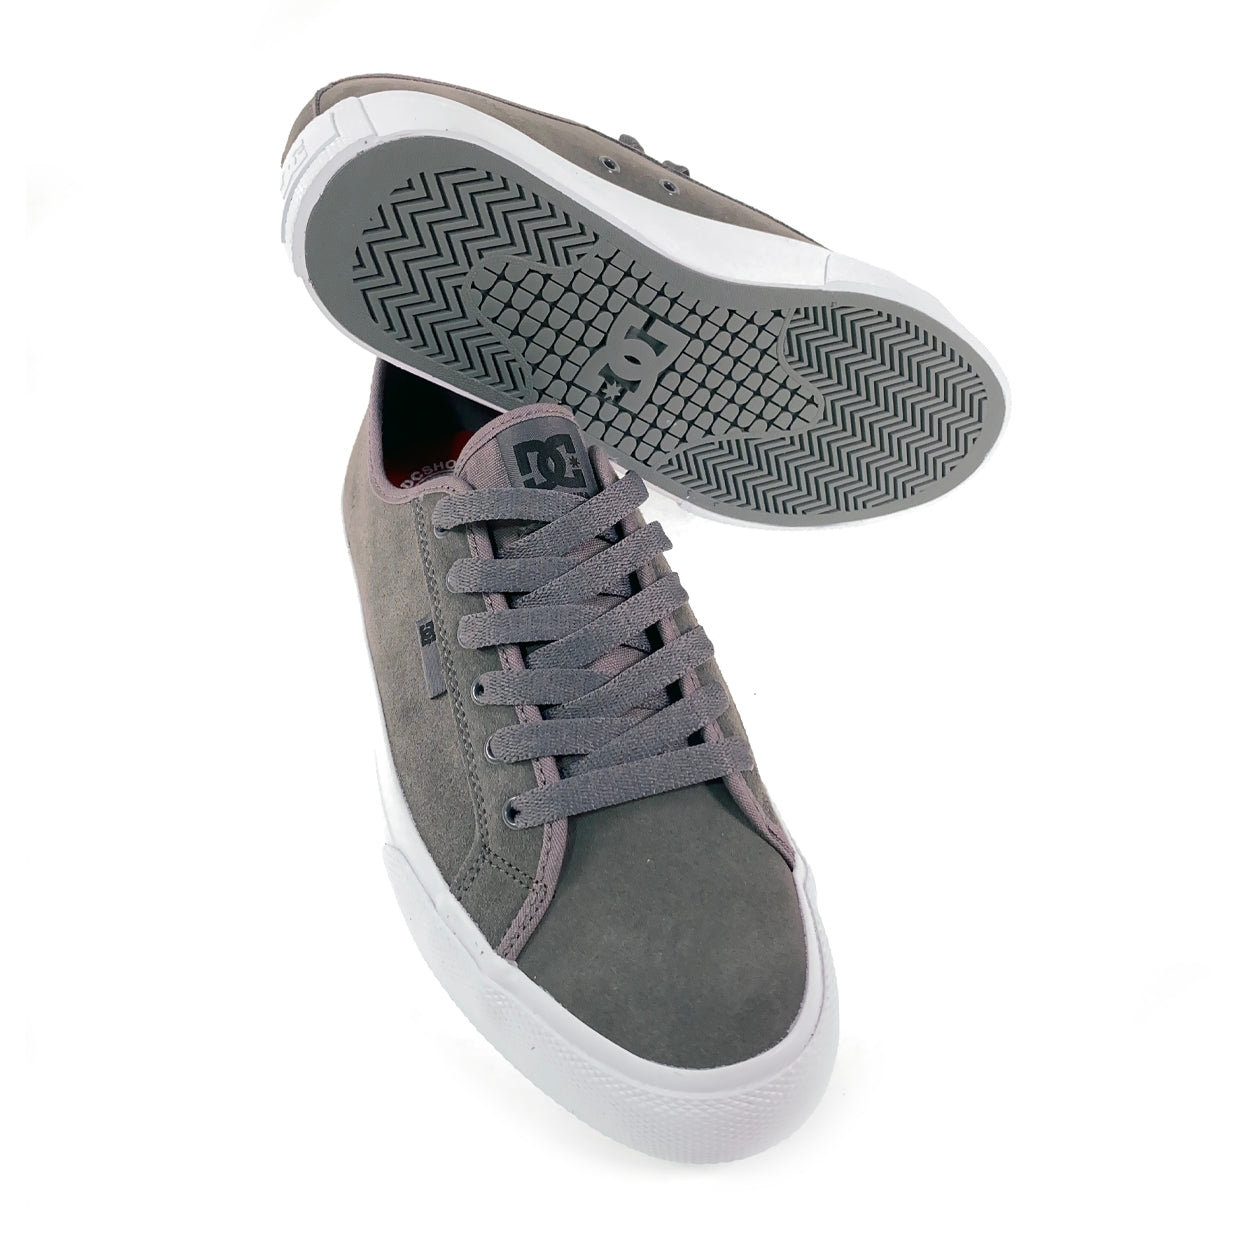 DC Shoes Manual S Leather Skate Shoes - Grey - Prime Delux Store